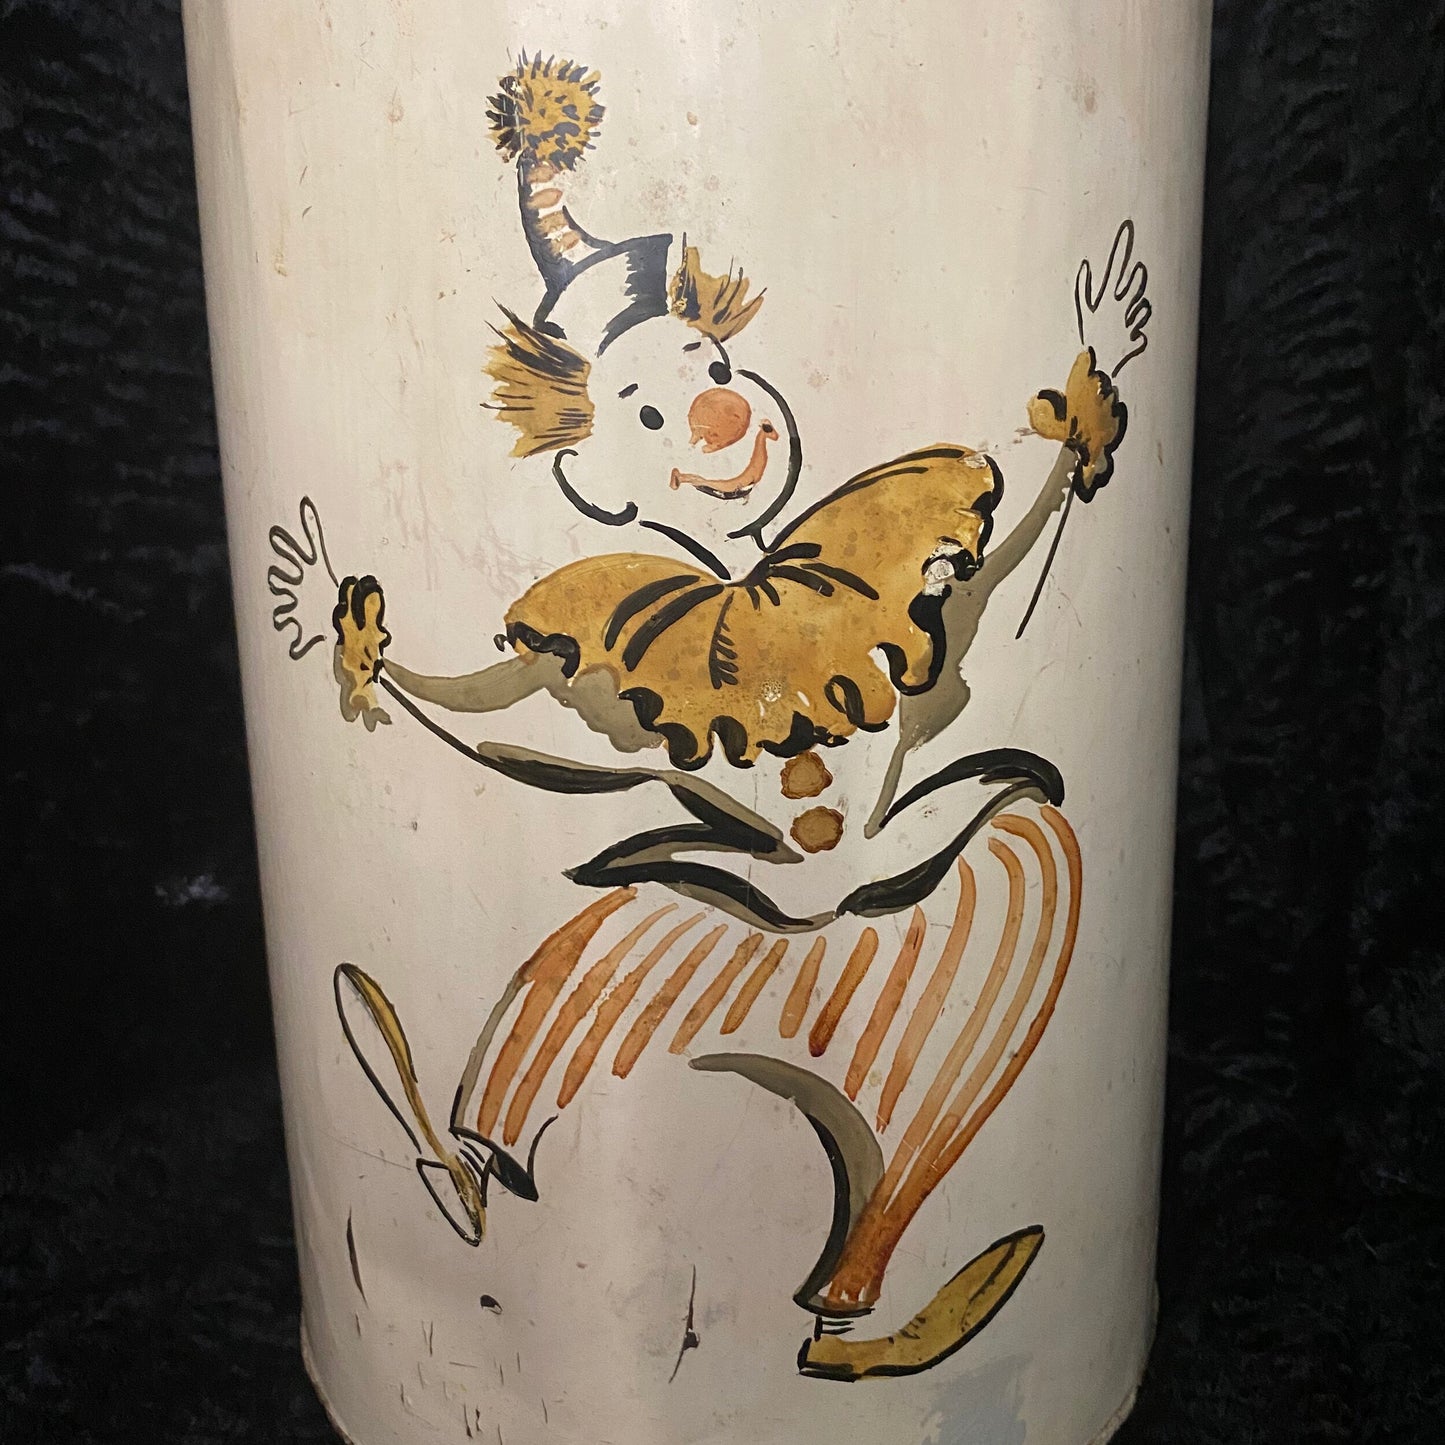 Vintage Clown Metal Tin Canister/Trash Can